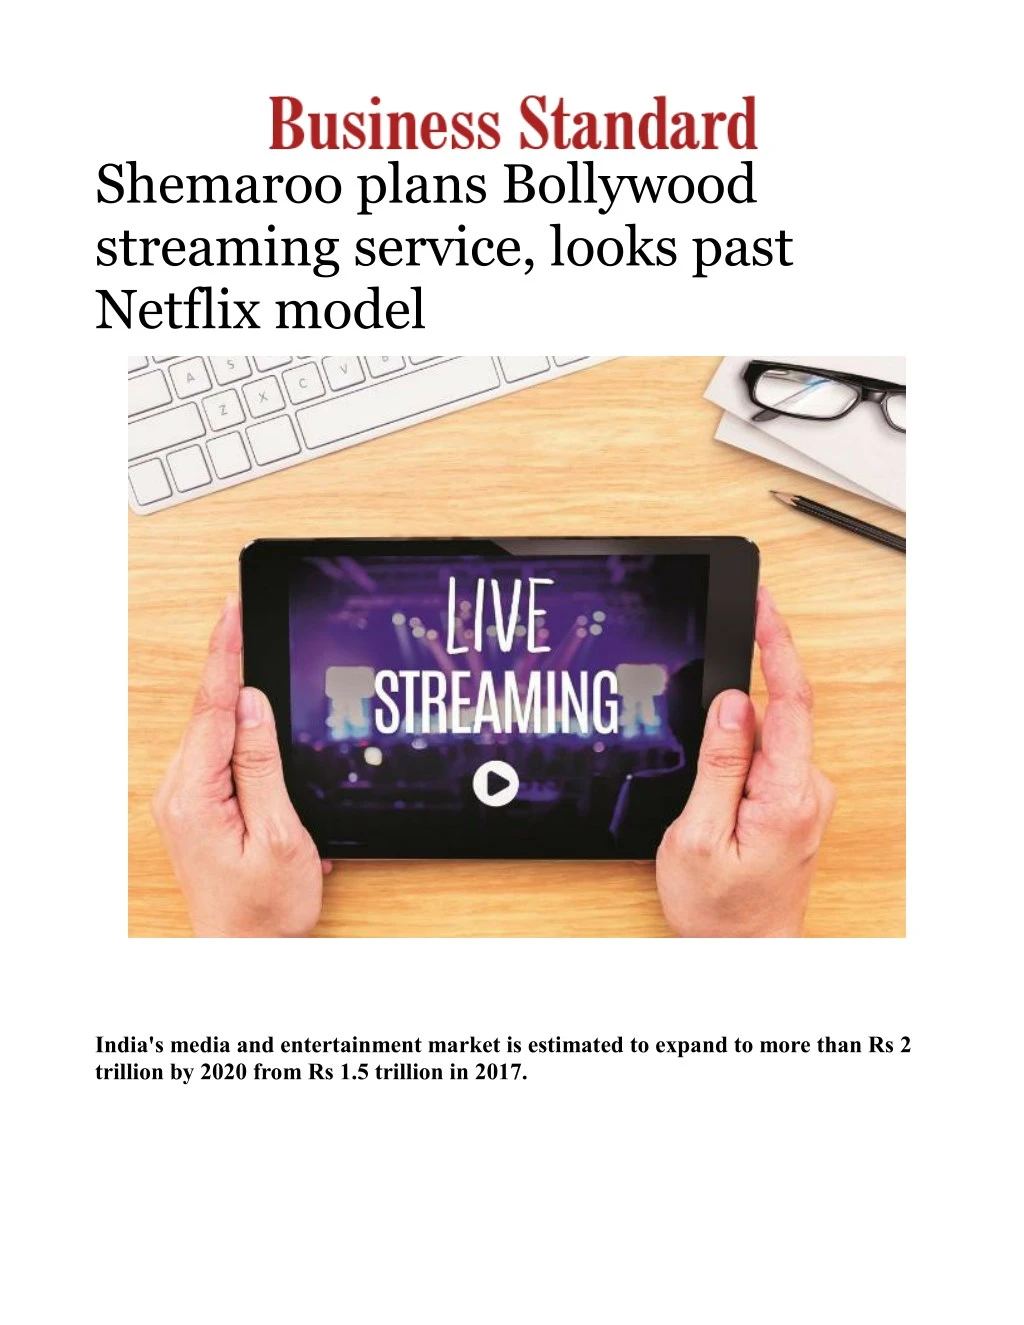 shemaroo plans bollywood streaming service looks